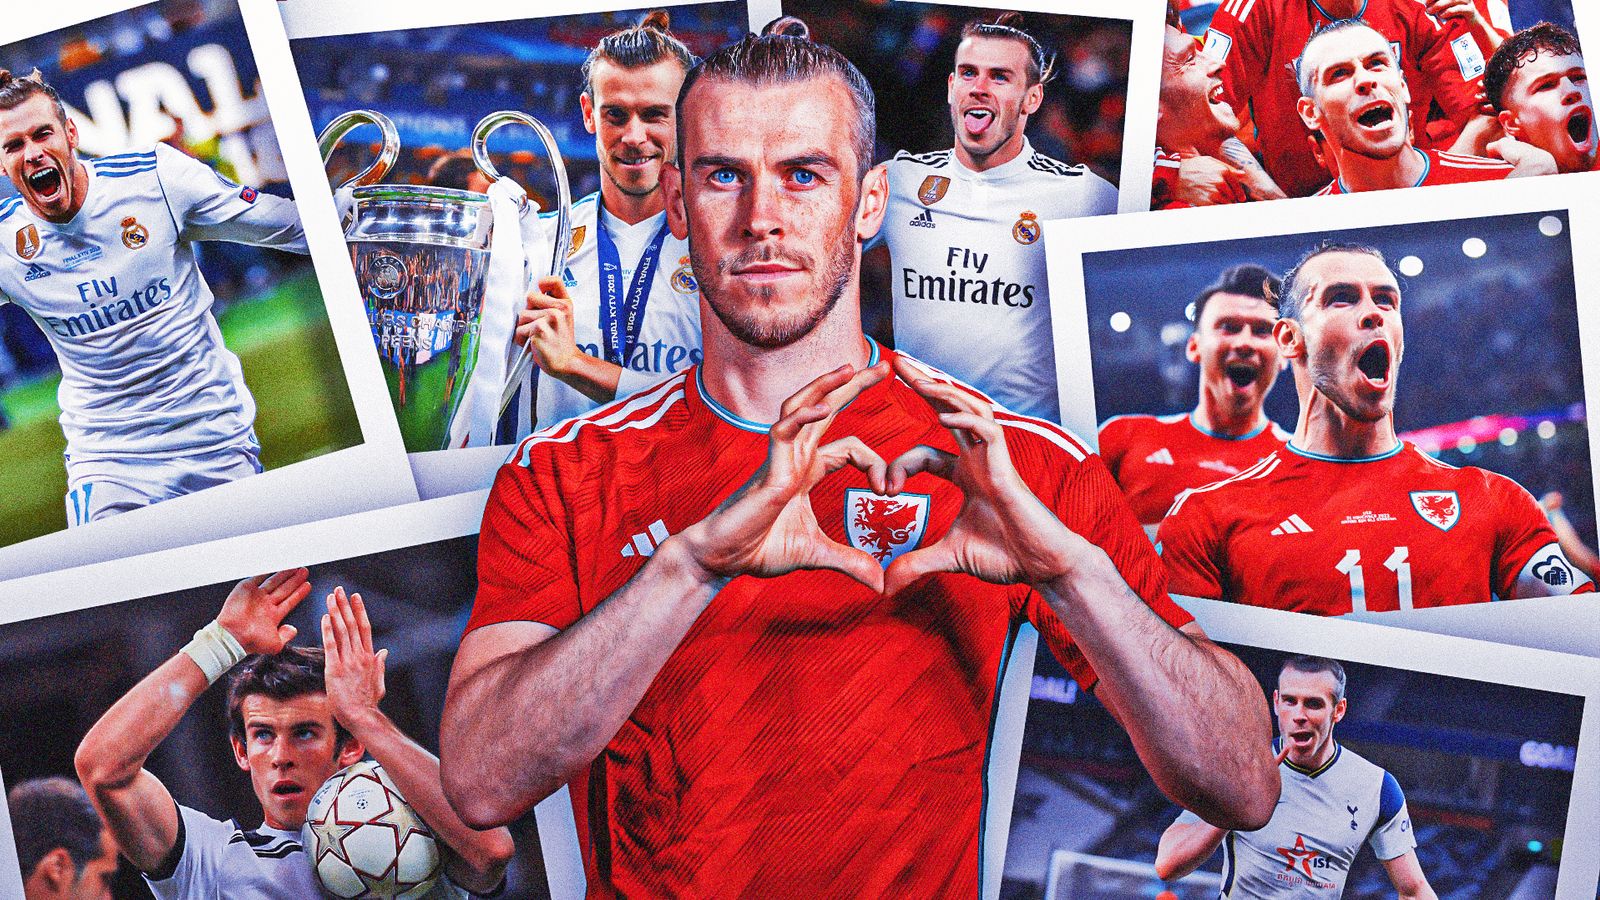 Gareth Bale announces retirement from football: 'I have realised